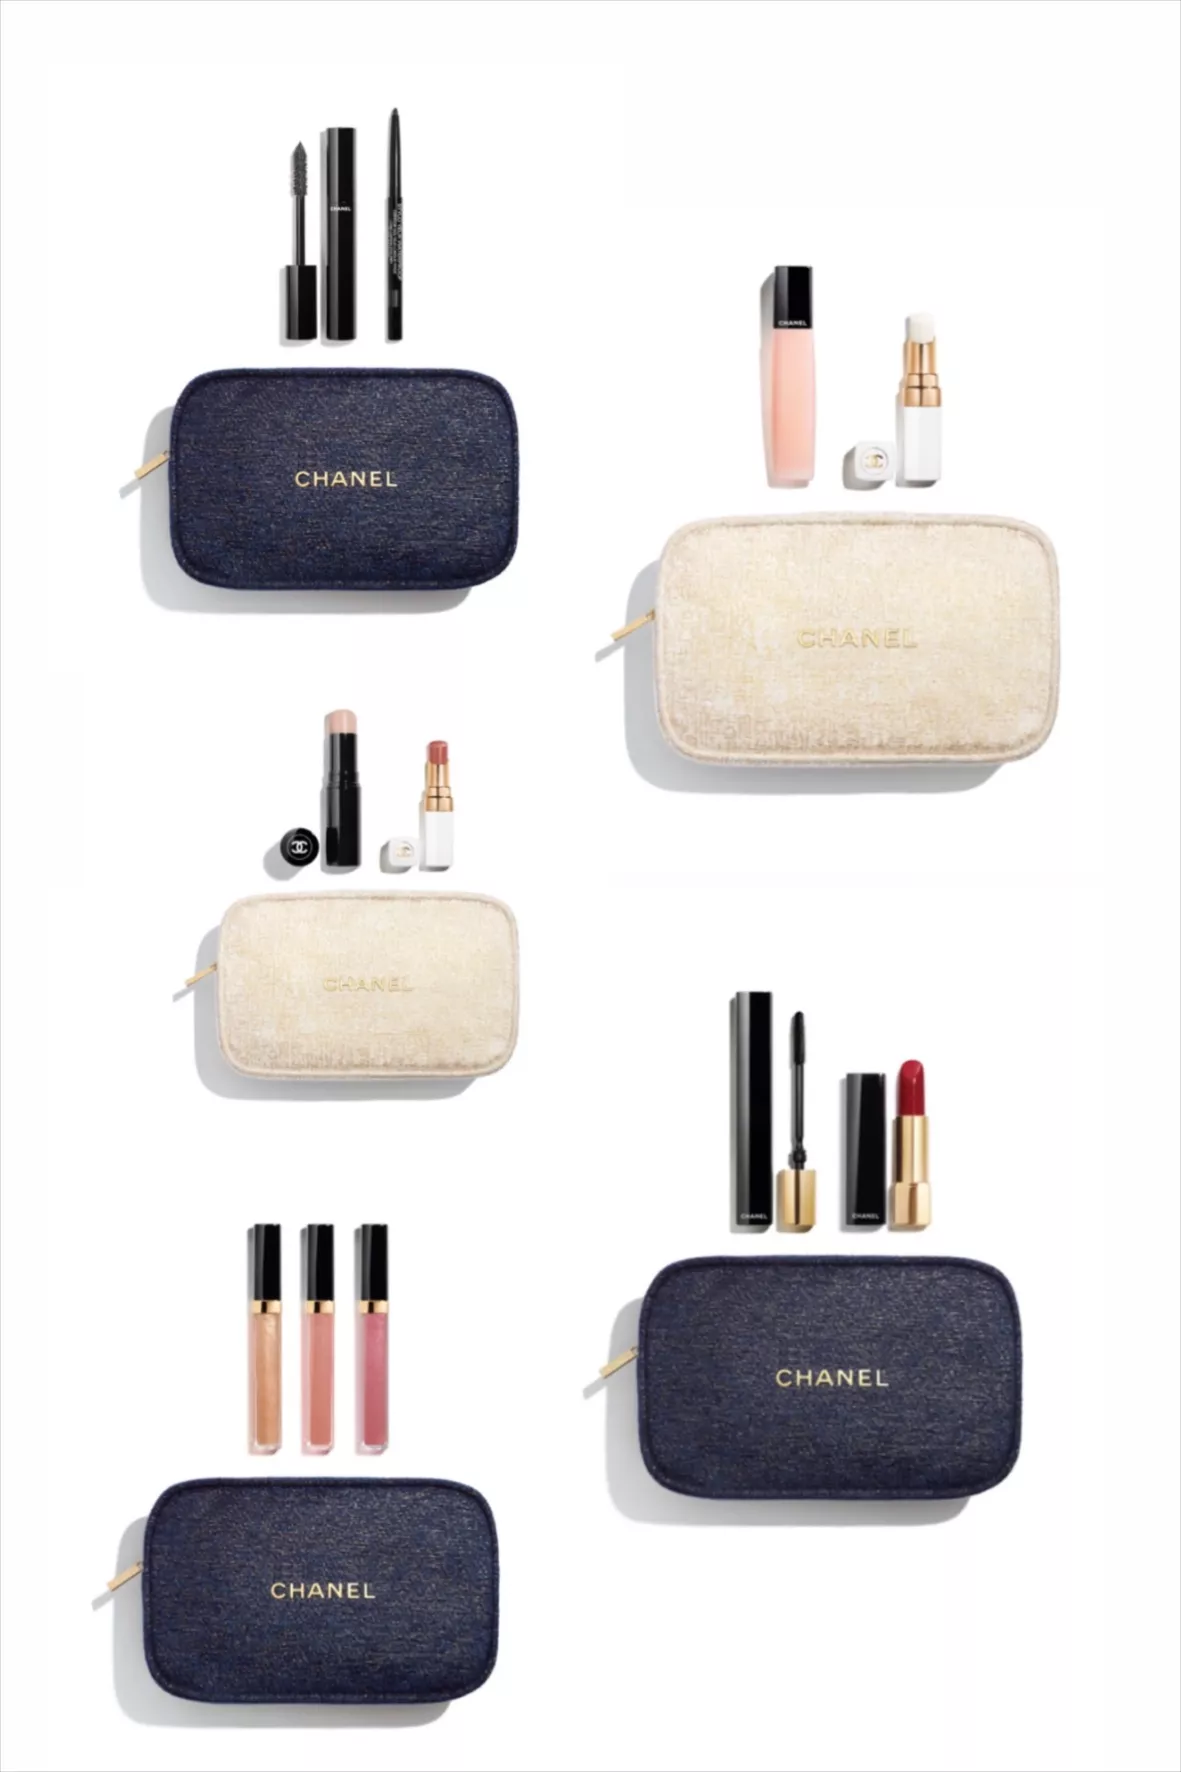 Chanel Makeup Gift Sets Holiday 2020 - Review and Swatches